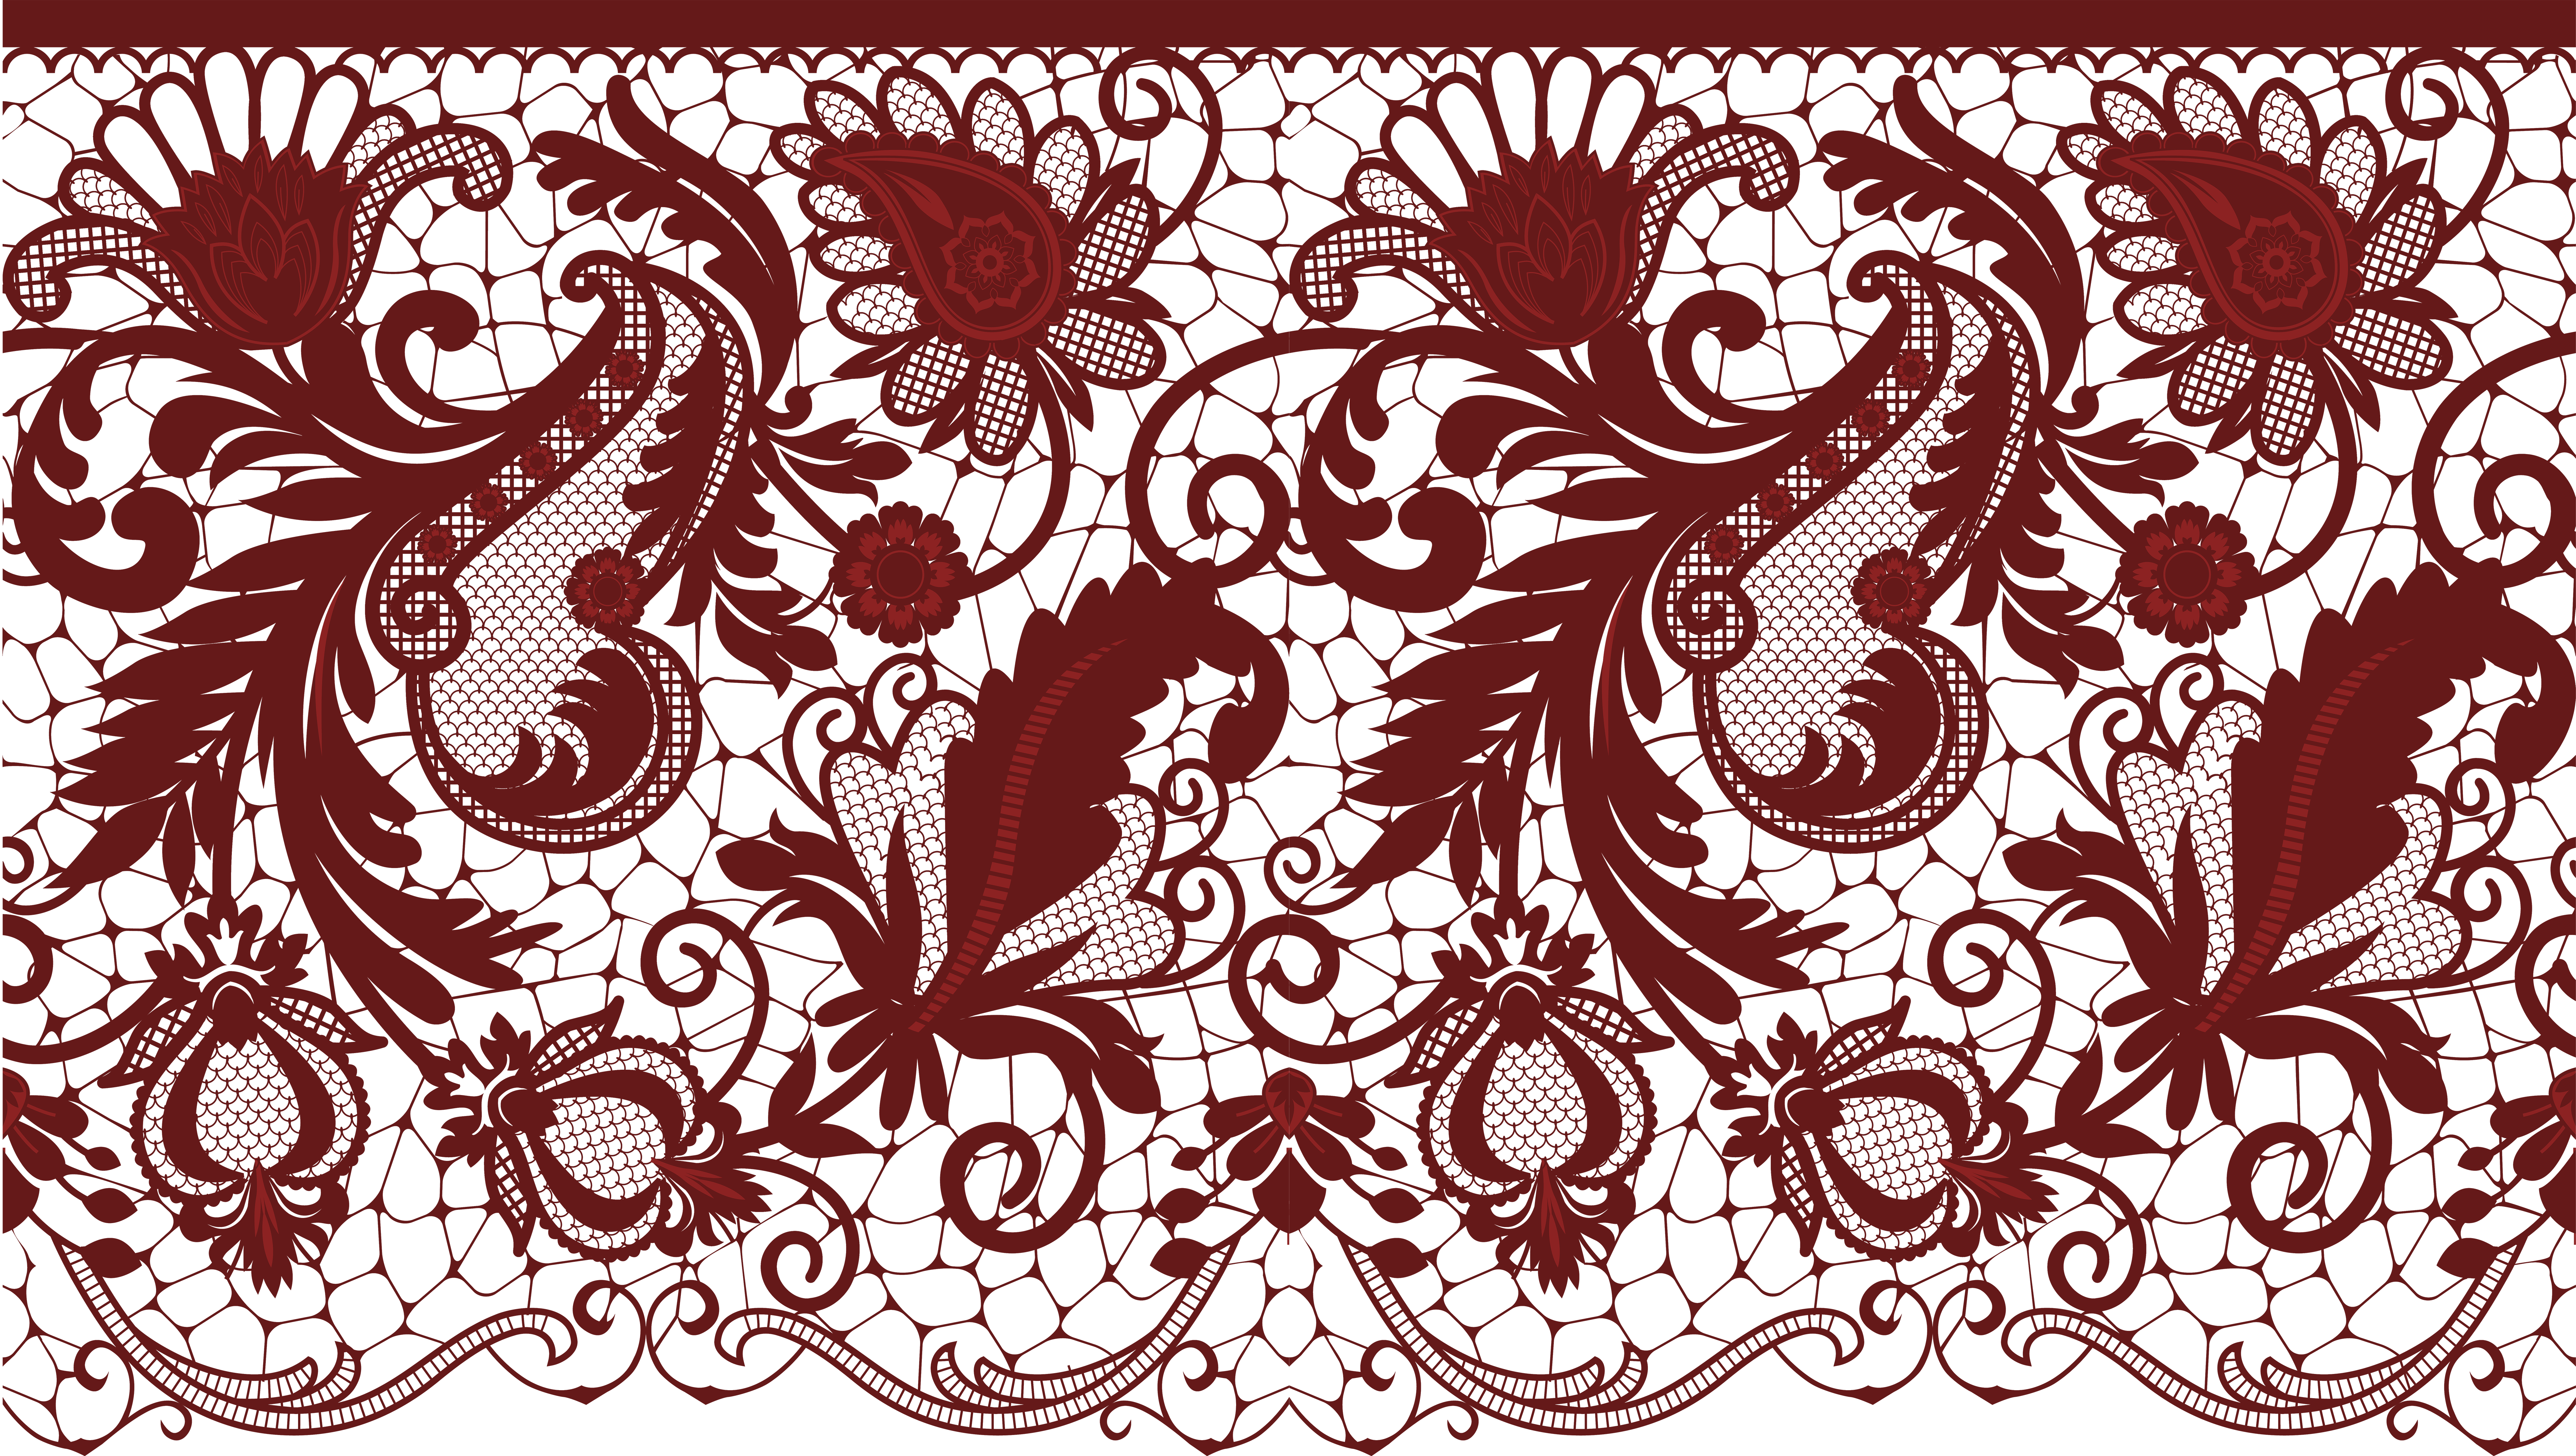 Deco Invitation Lace Transparent Wedding PNG Image High Quality Clipart